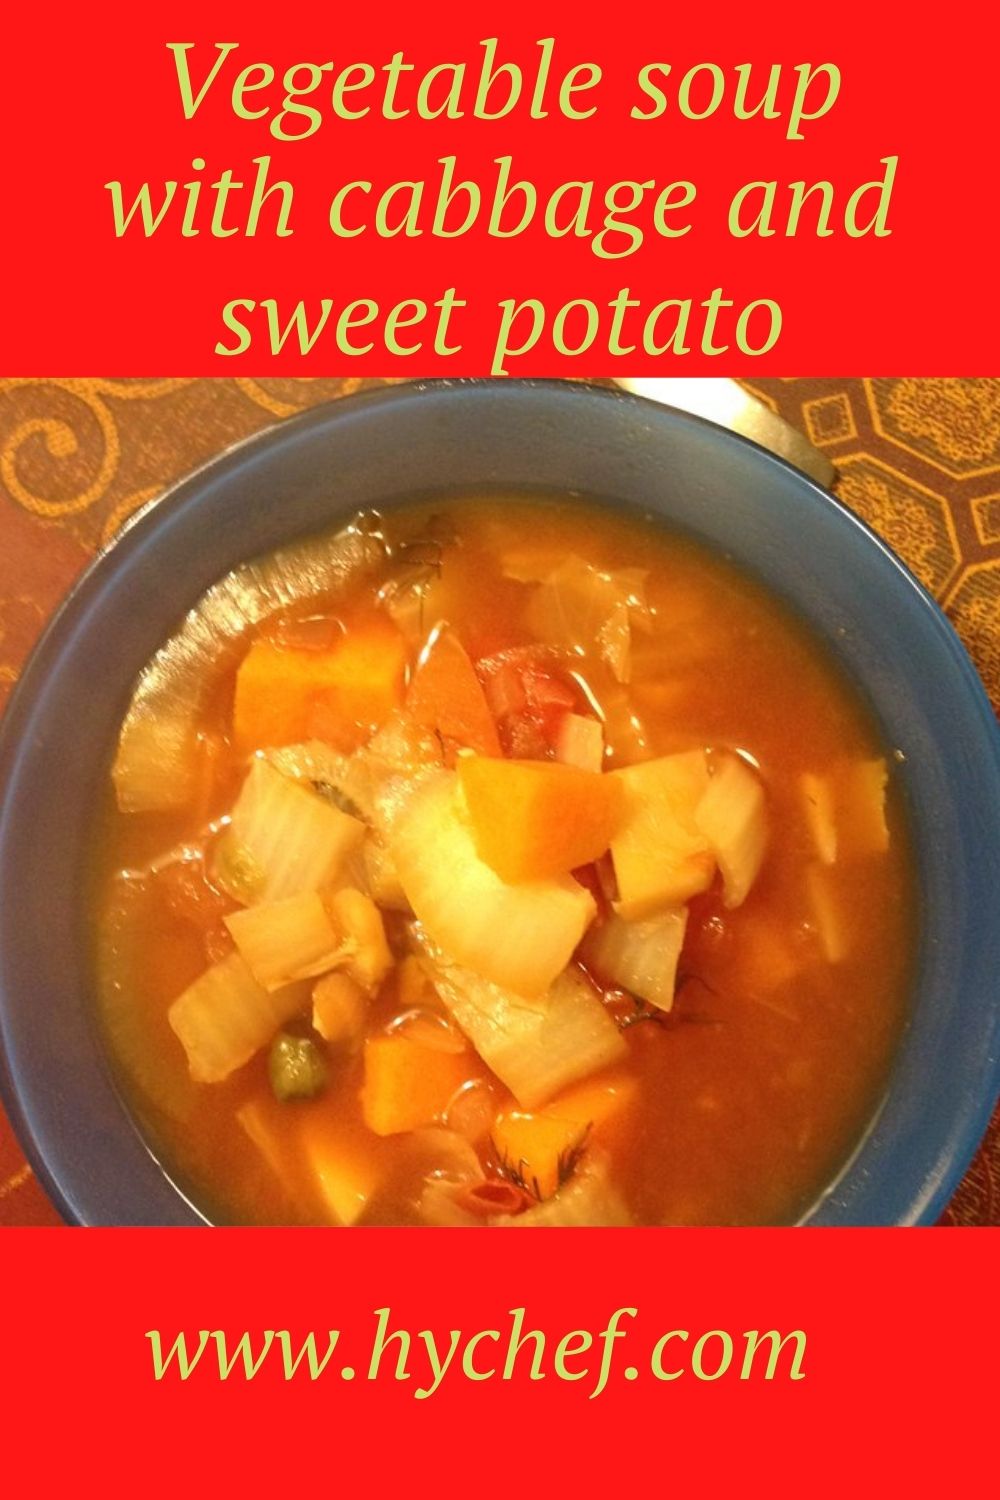 Vegetable Soup with Cabbage and Sweet Potato